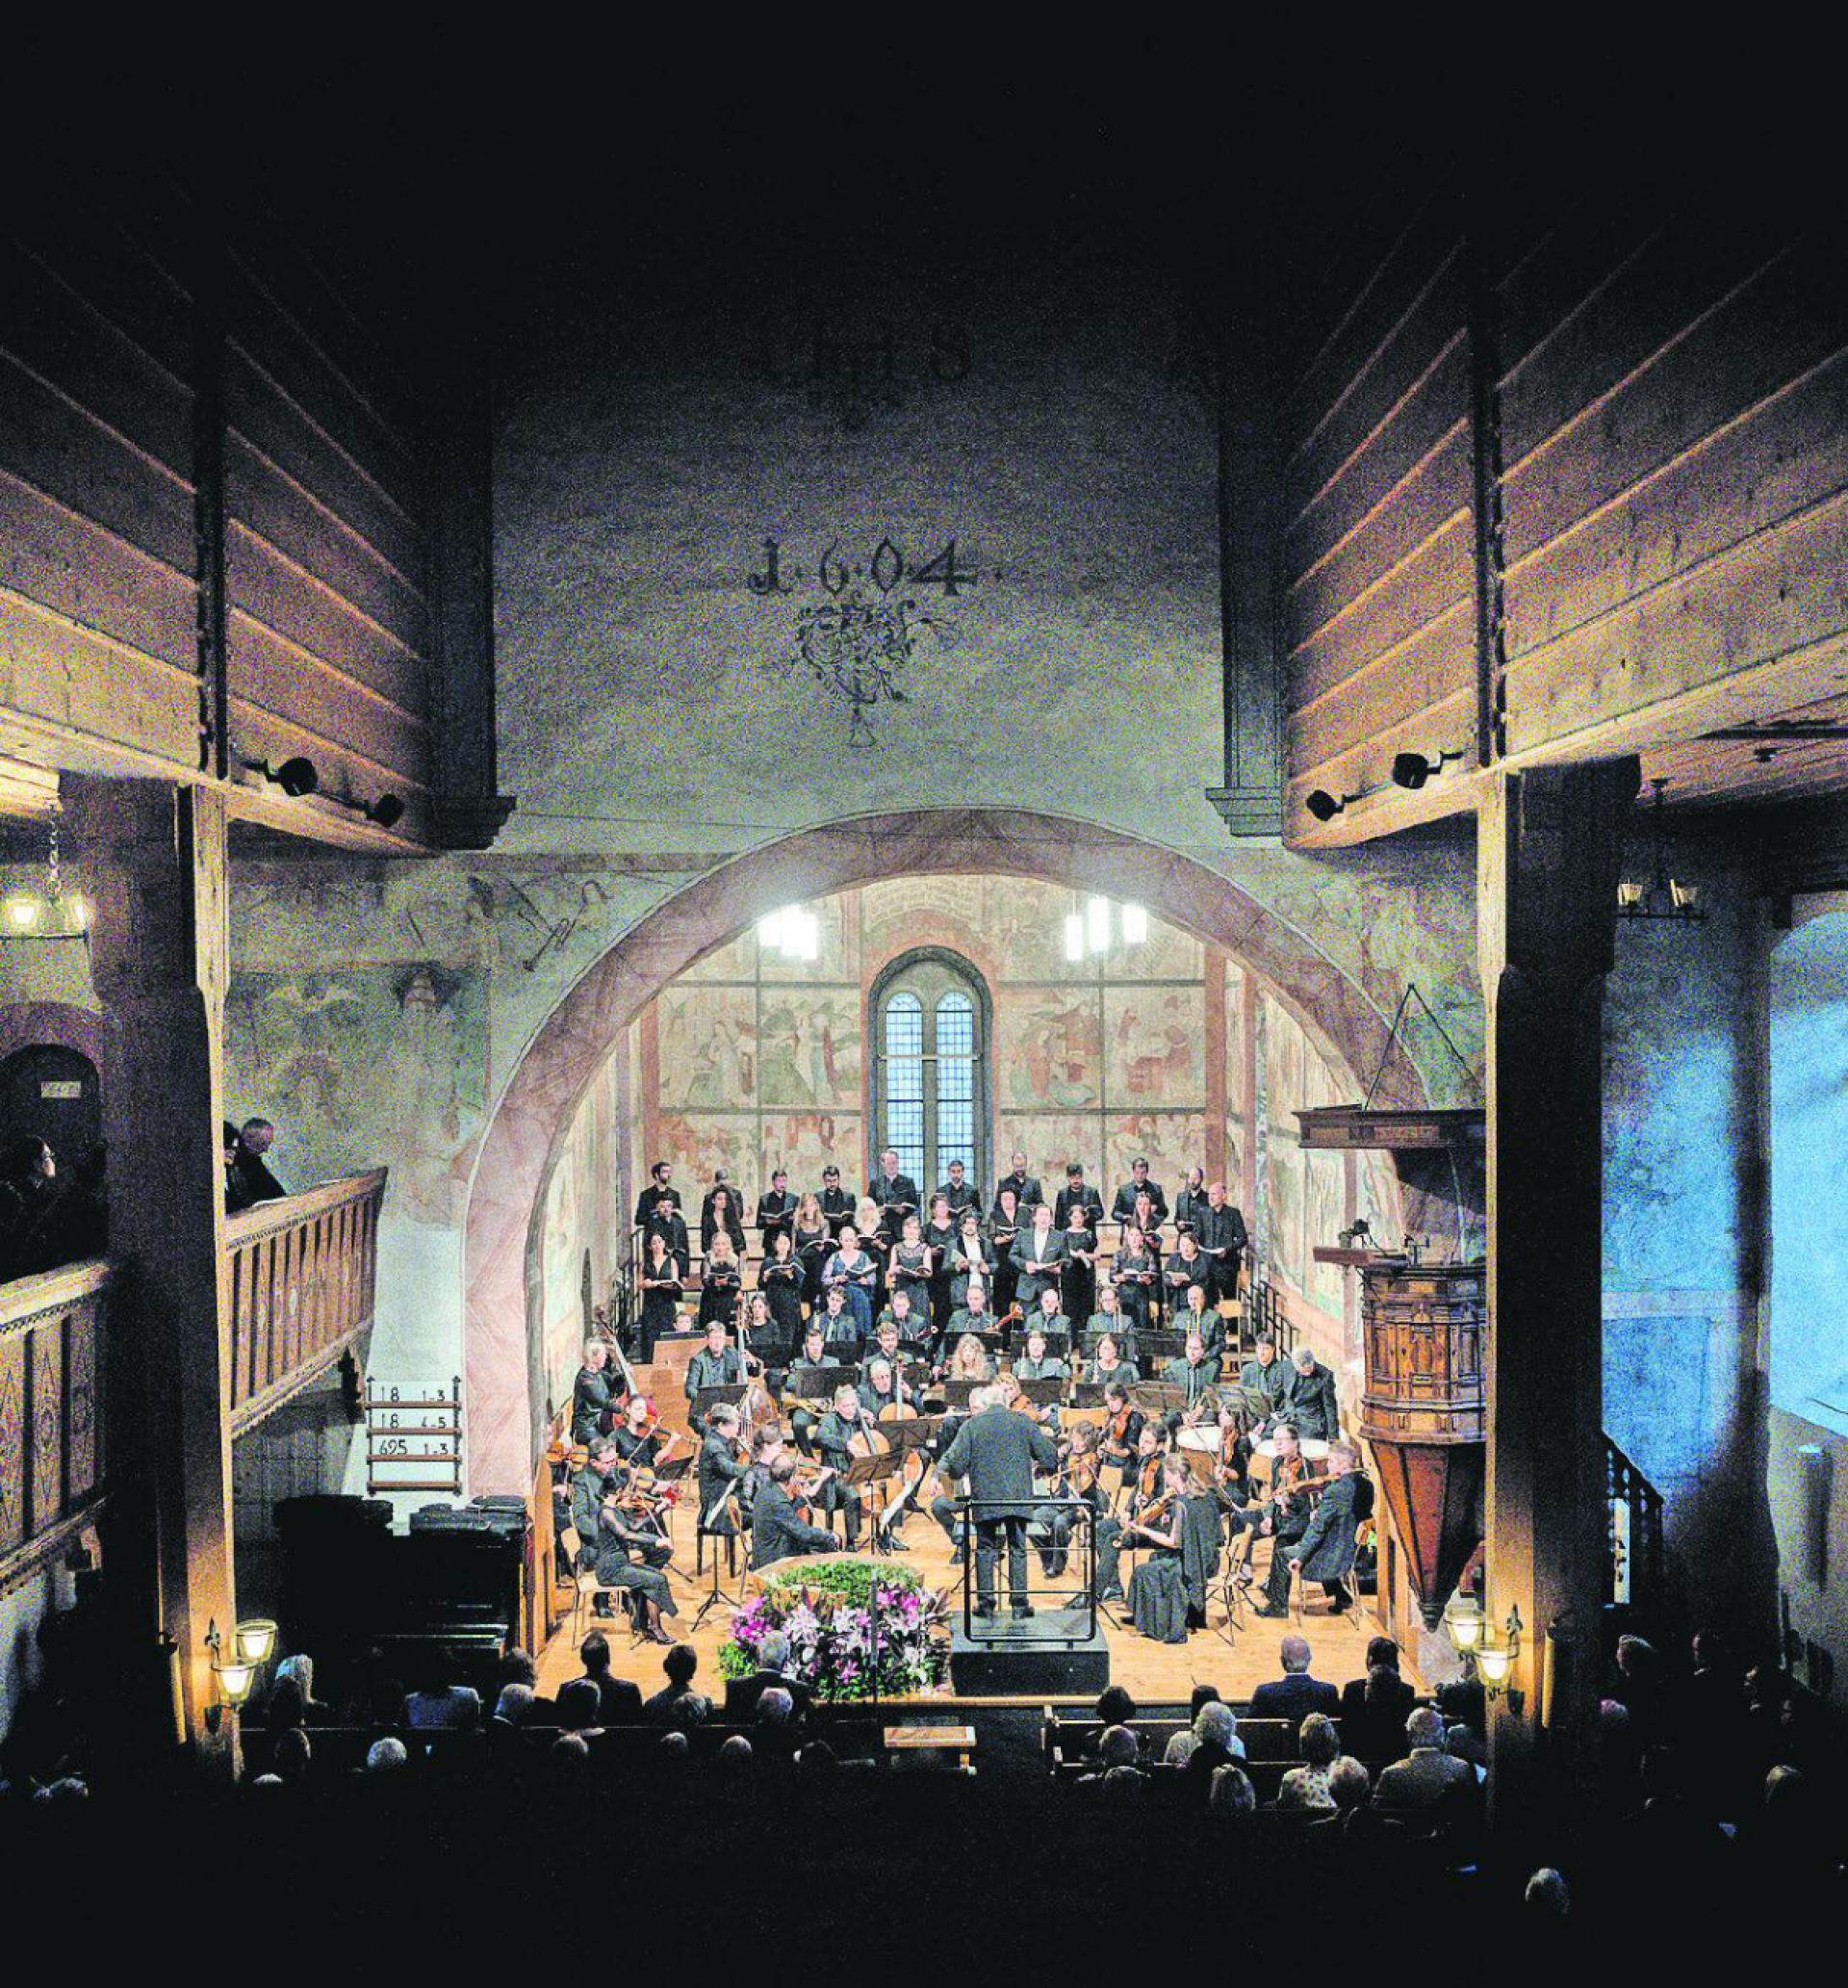 The Camerata Salzburg performed Schubert together with the Collegium "Vocale Gent" at the opening concert of the Gstaad Menuhin Festival in the church in Saanen. PHOTO: RAPHAEL FAUX/GSTAADPHOTOGRAPHY.COM